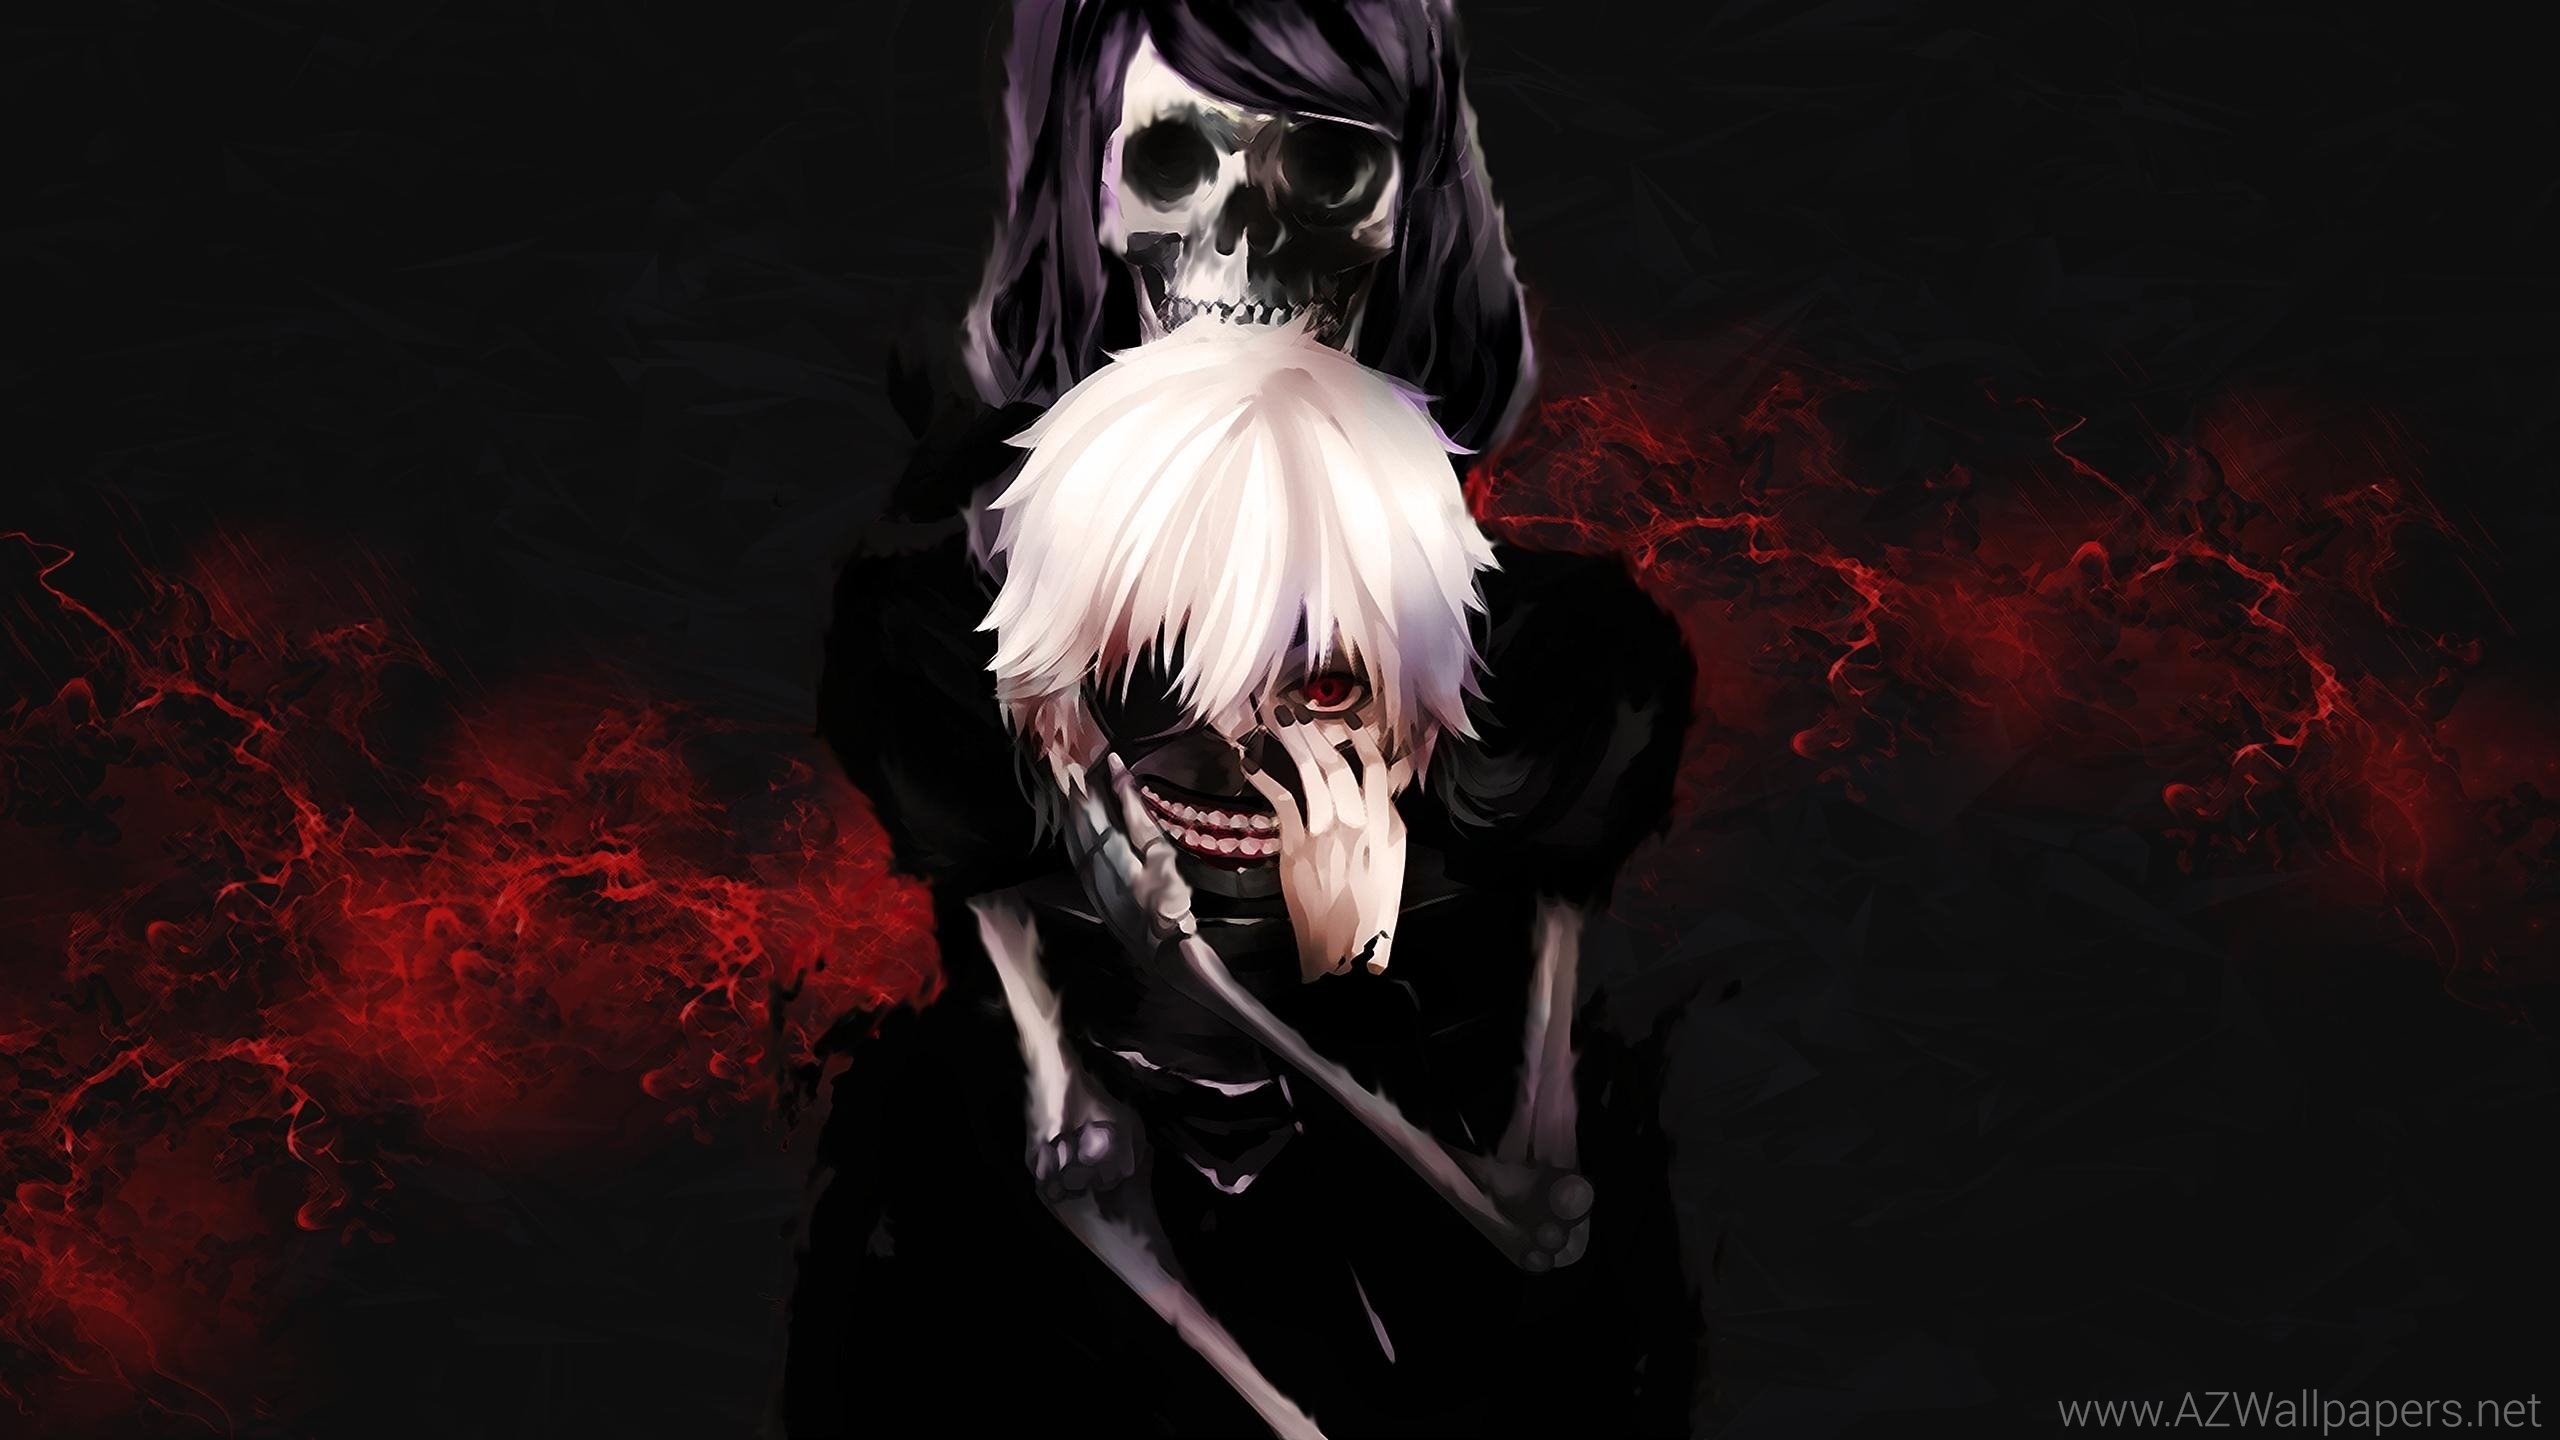 wallpaper tokyo ghoul android,darkness,cg artwork,anime,font,goth subculture